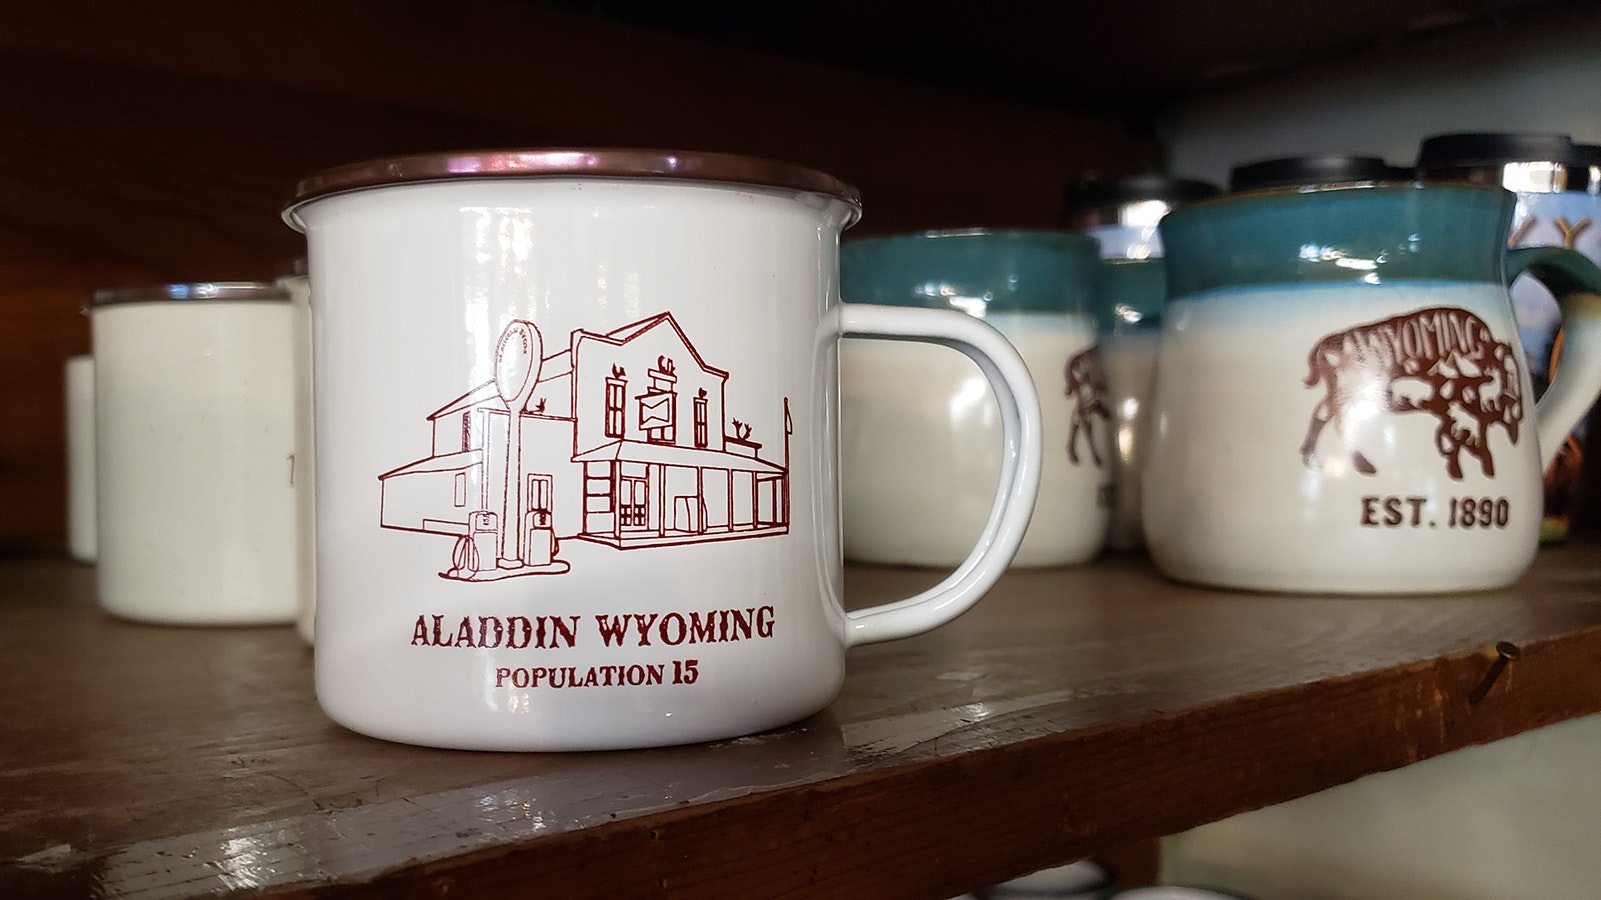 Mugs featuring the Aladdin General Store are available as souvenirs of their visit to Wyoming's oldest store.